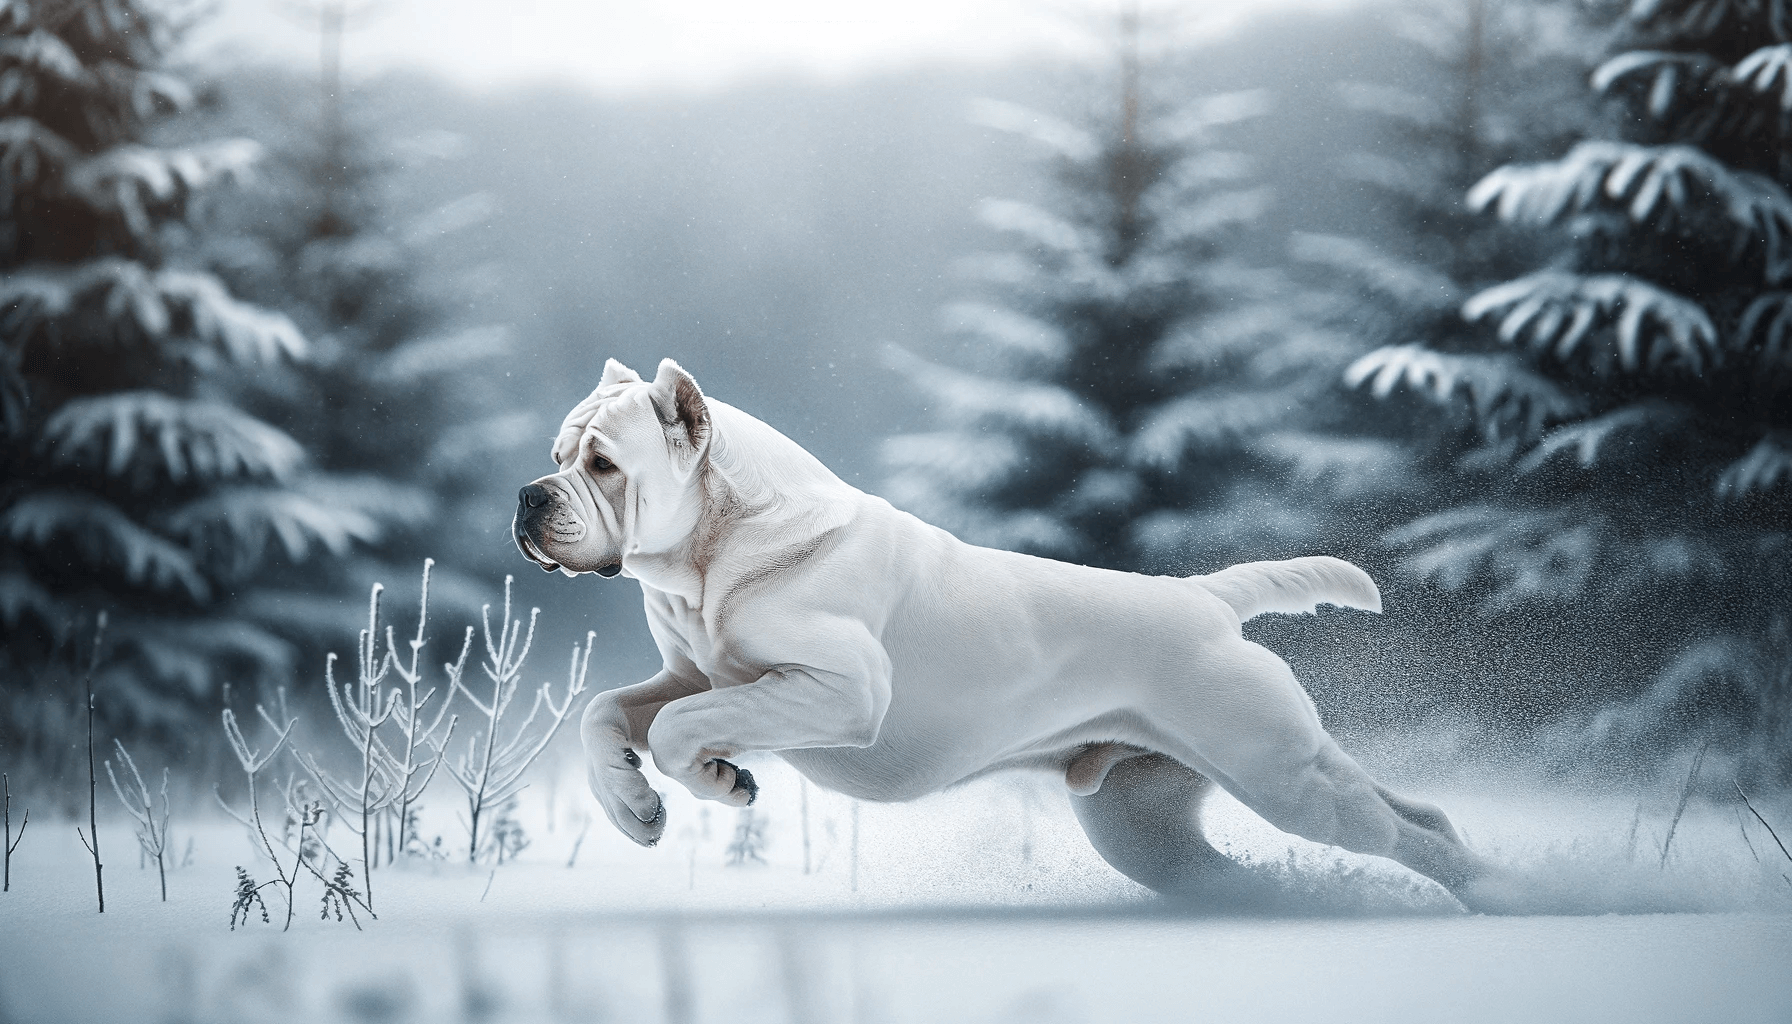 A White Cane Corso moving through a snowy landscape, demonstrating the breed's powerful gait and grace.